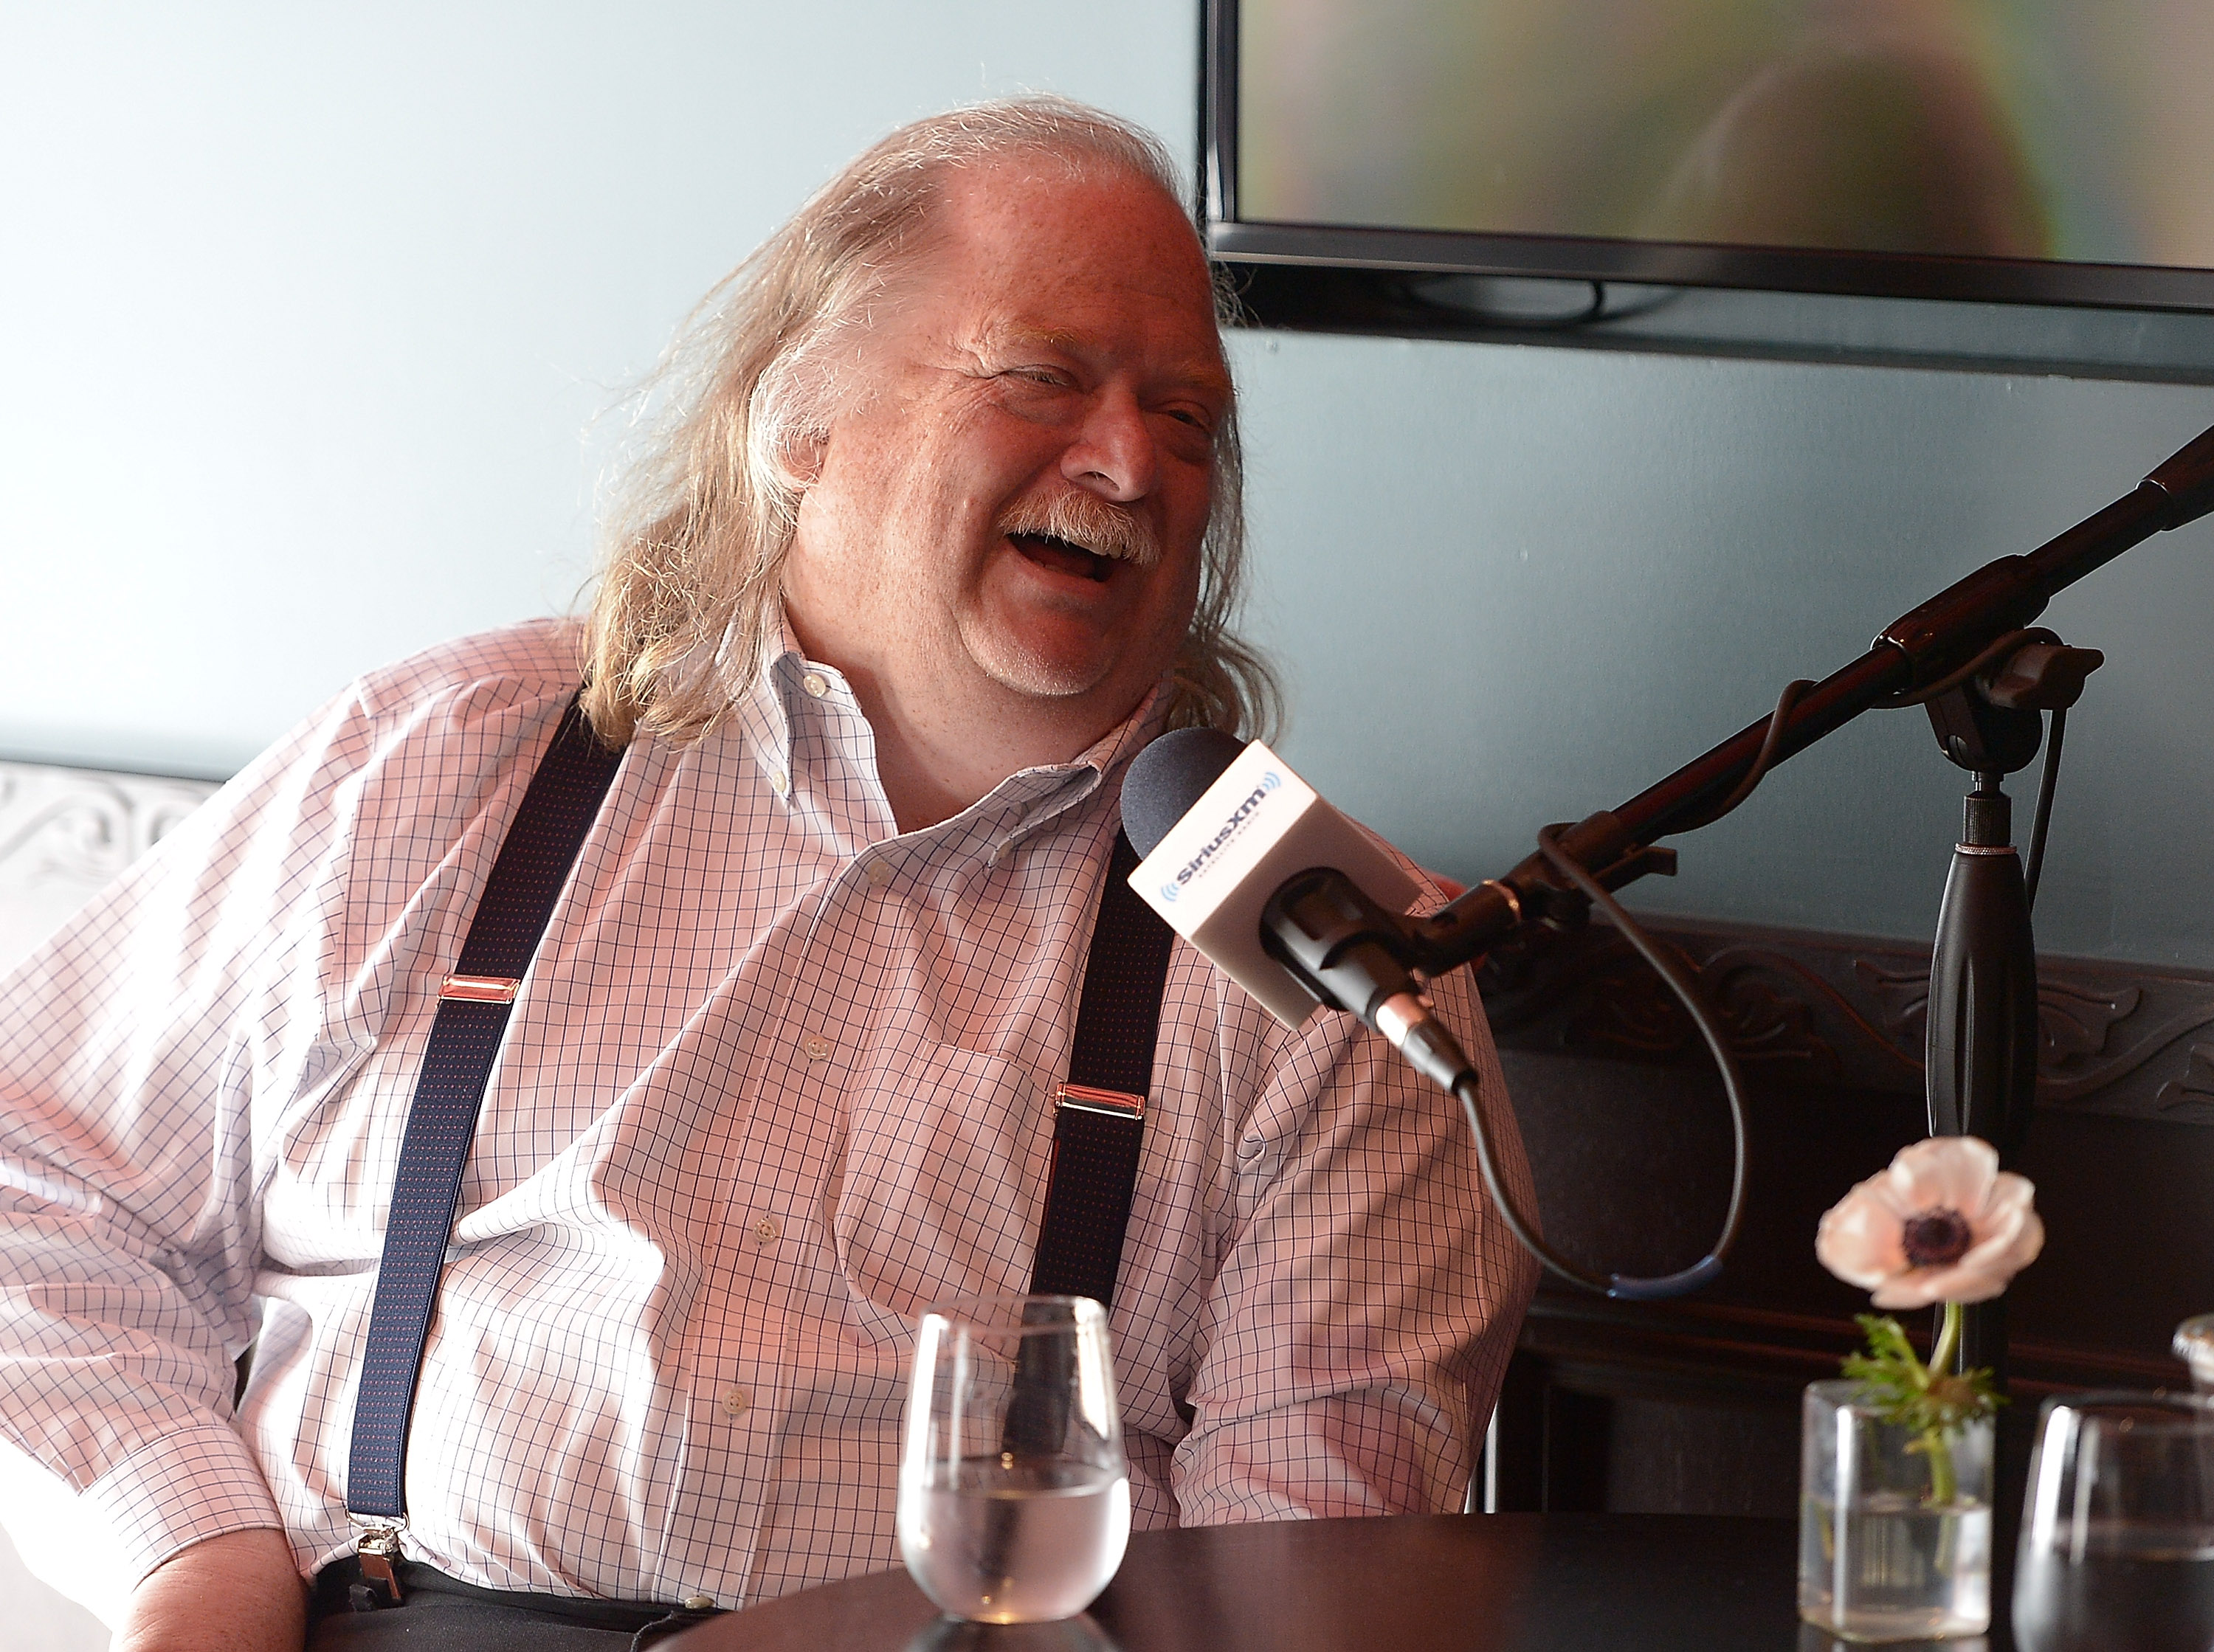 Restaurateur and SiriusXM host Will Guidara tapes his SiriusXM show, First Date with Will Guidara, featuring Los Angeles Times food critic Jonathan Gold